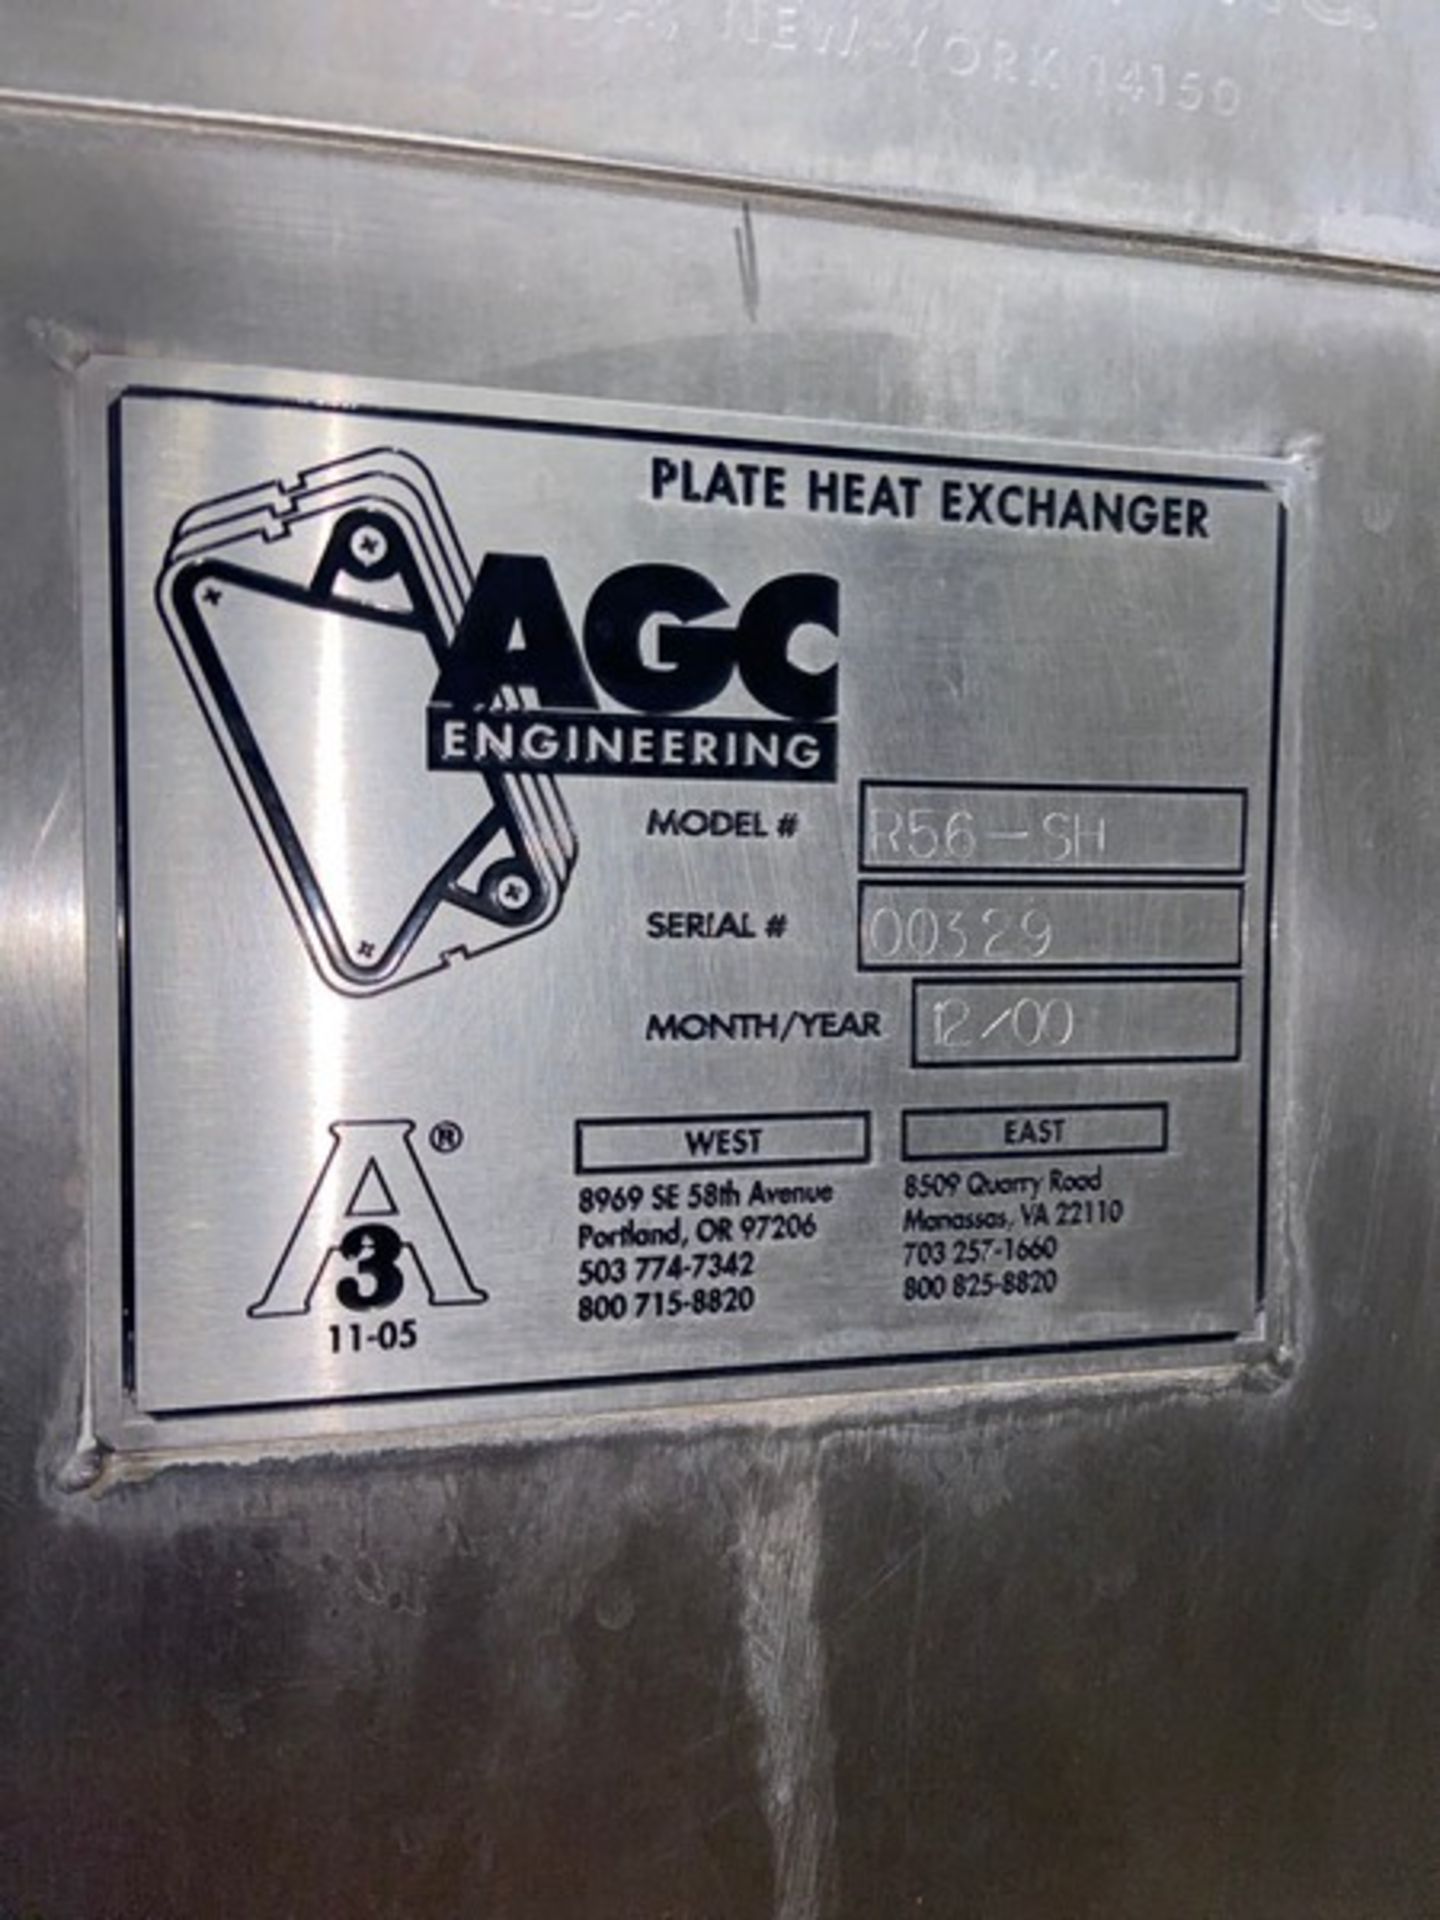 AGC 3-Section Plate Heat Exchanger, M/N R56-SH,S/N 00329, Mounted on S/S Frame(LOCATED IN MANTECA, - Image 3 of 5